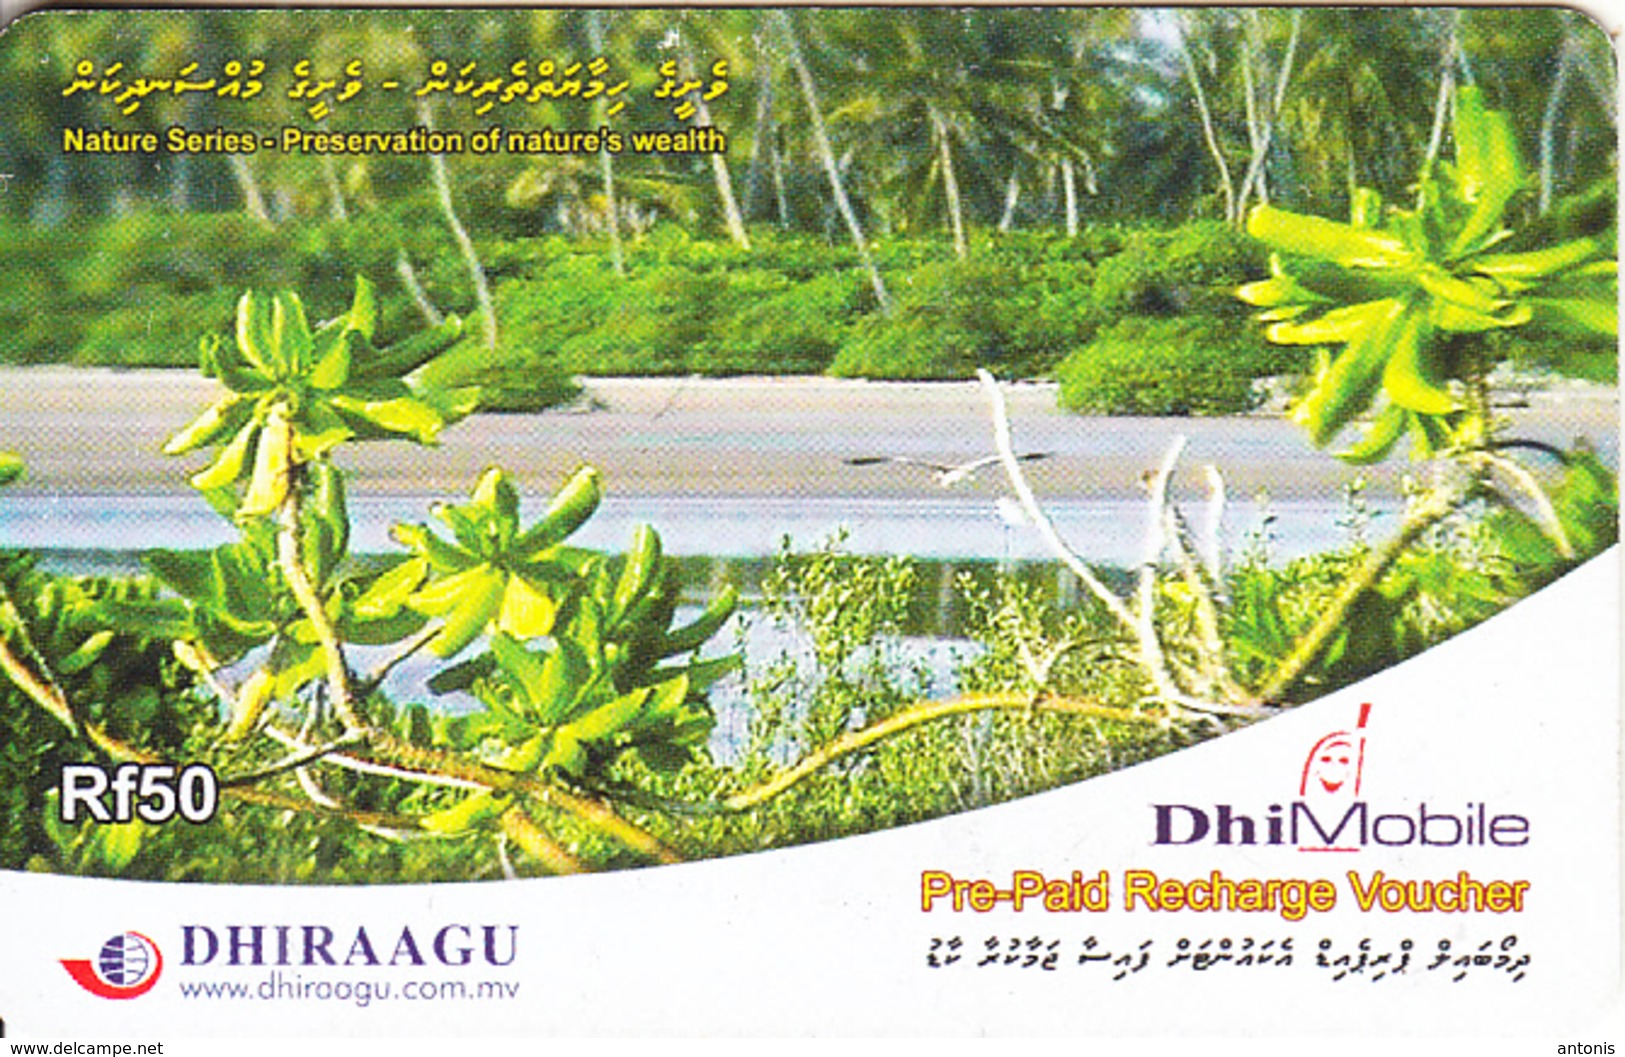 MALDIVES ISL. - Nature/Preservation Of Nature's Wealth, DHI Mobile By Dhiraagu Recharge Card Rf 50, Used - Maldiven